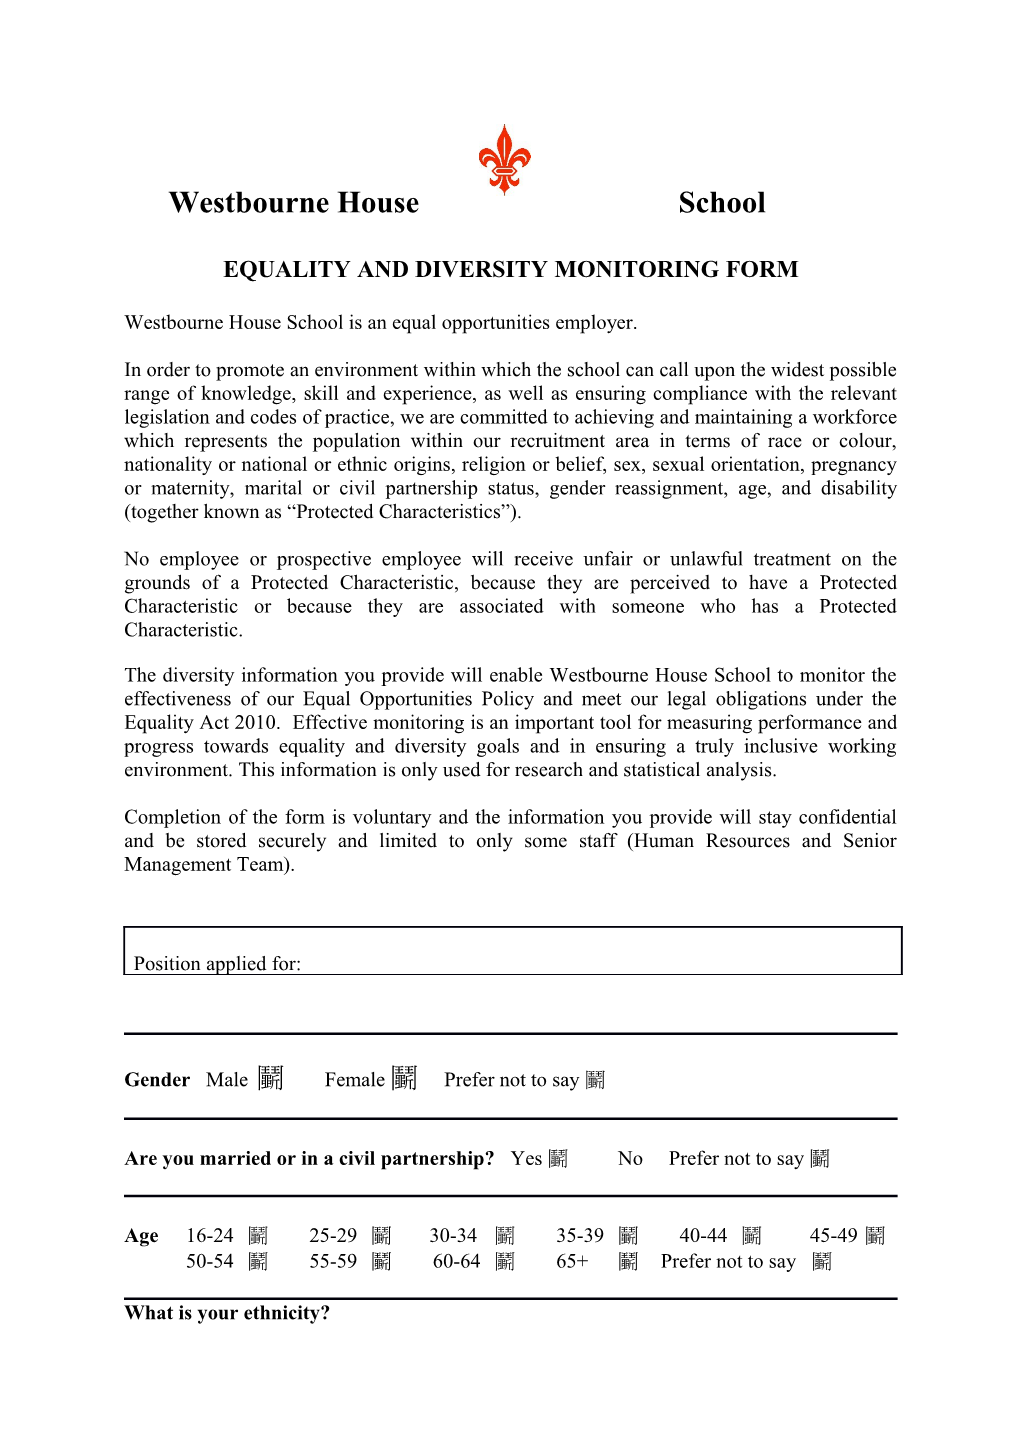 Equality and Diversity Monitoring Form s2